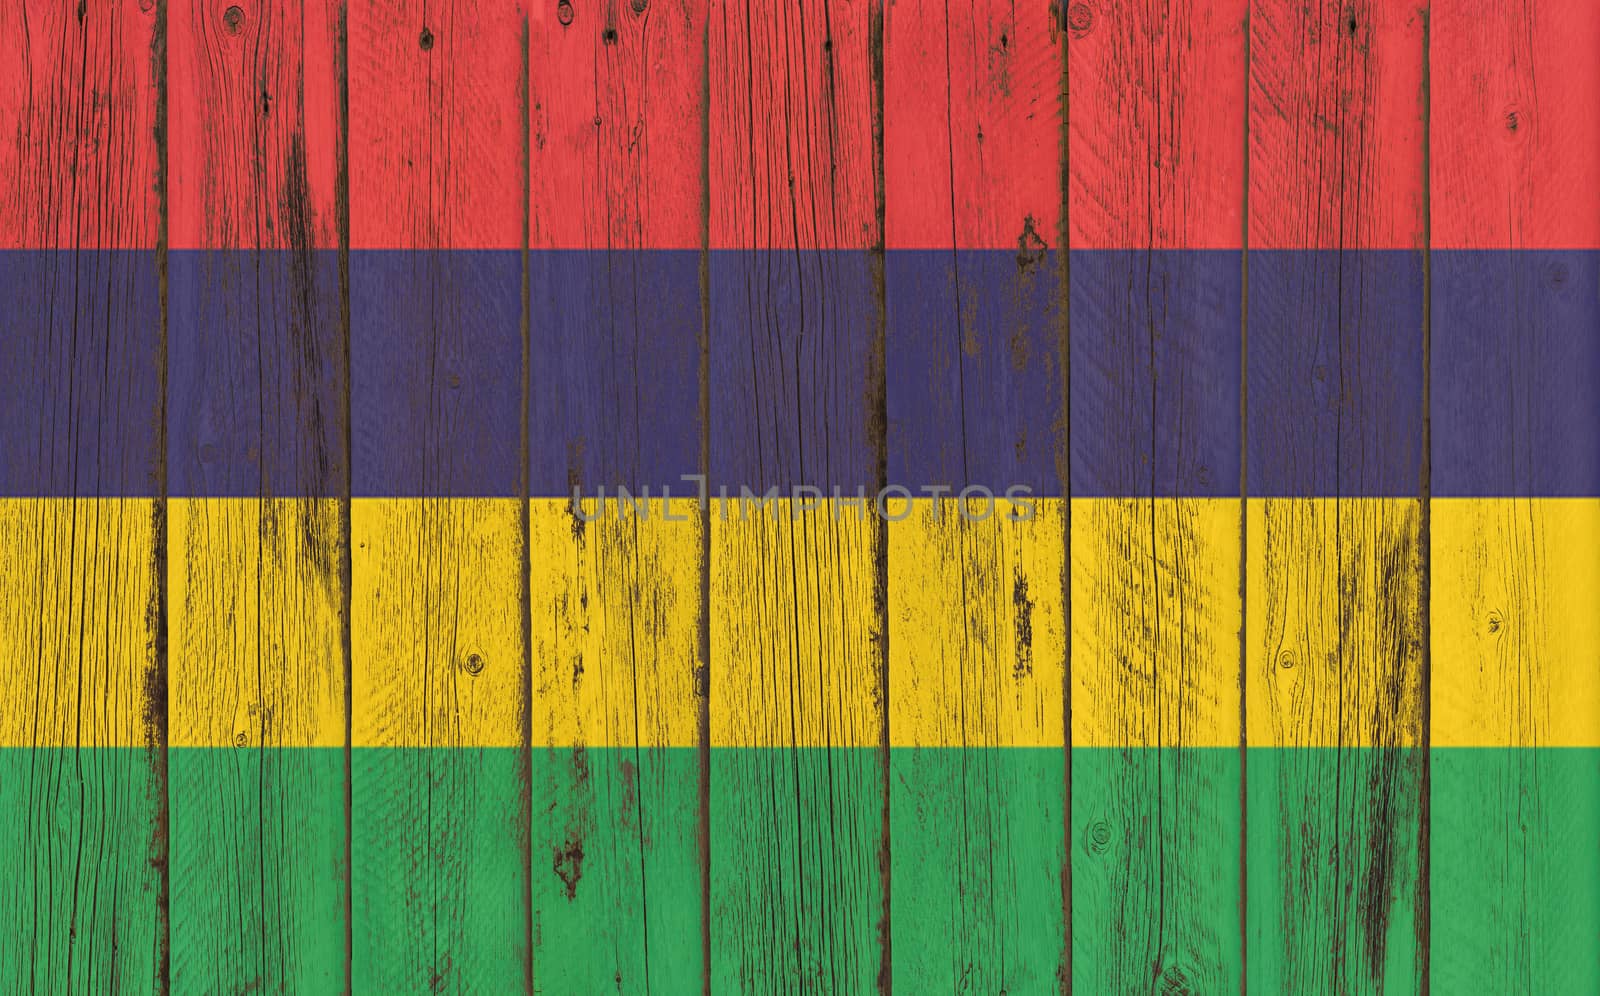 mauritius flag on old wood texture background - old wood backgro by DGolbay